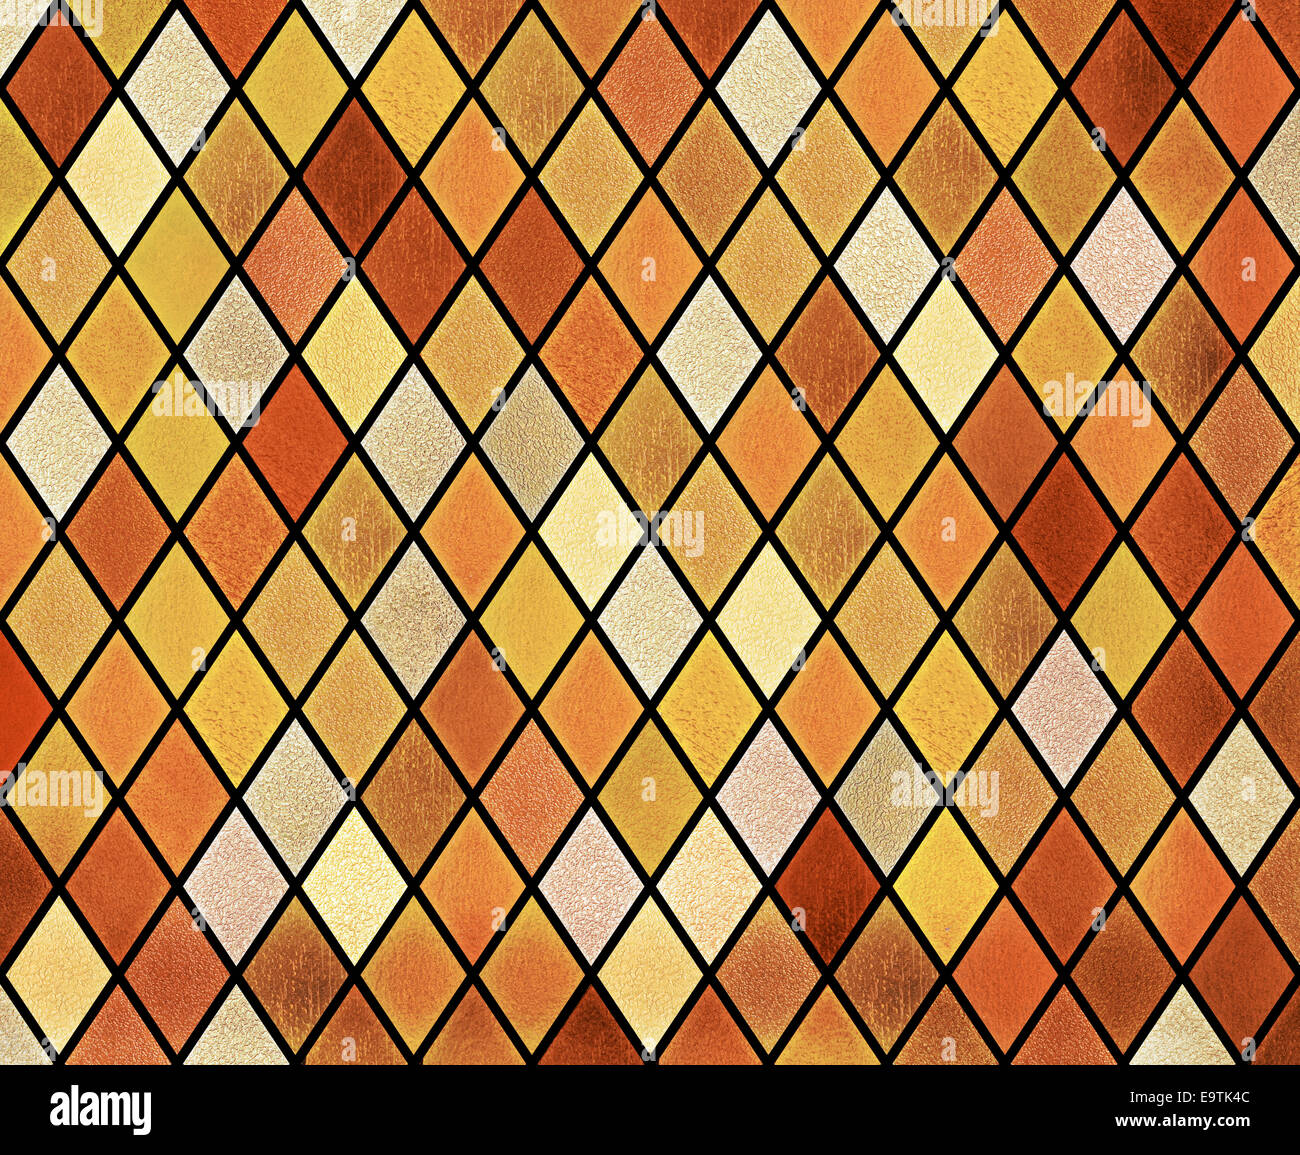 abstract stained glass window background Stock Photo